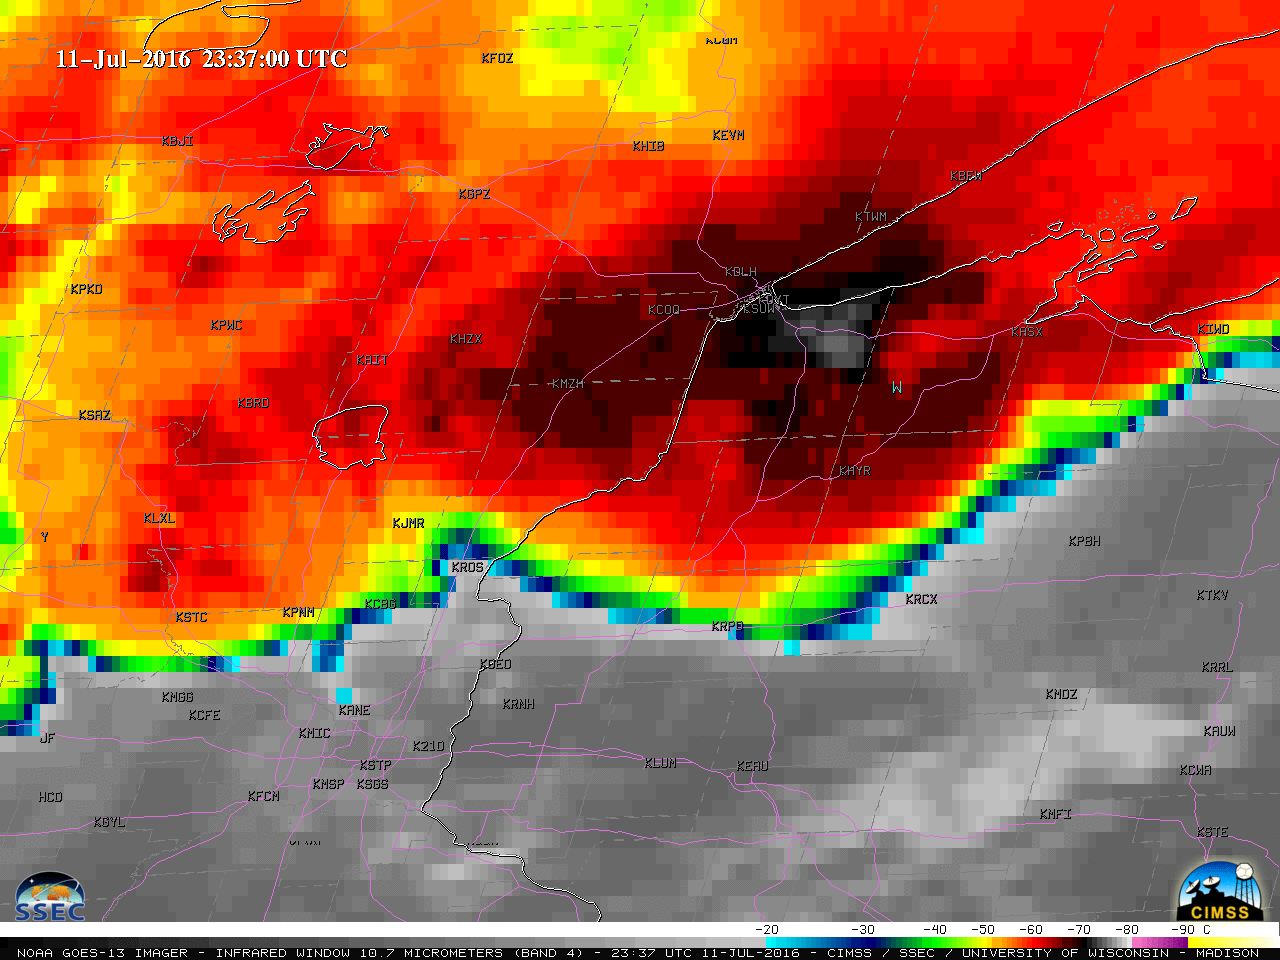 GOES-13 Infrared Window (10.7 µm) images, with SPC storm reports [click to play animation]